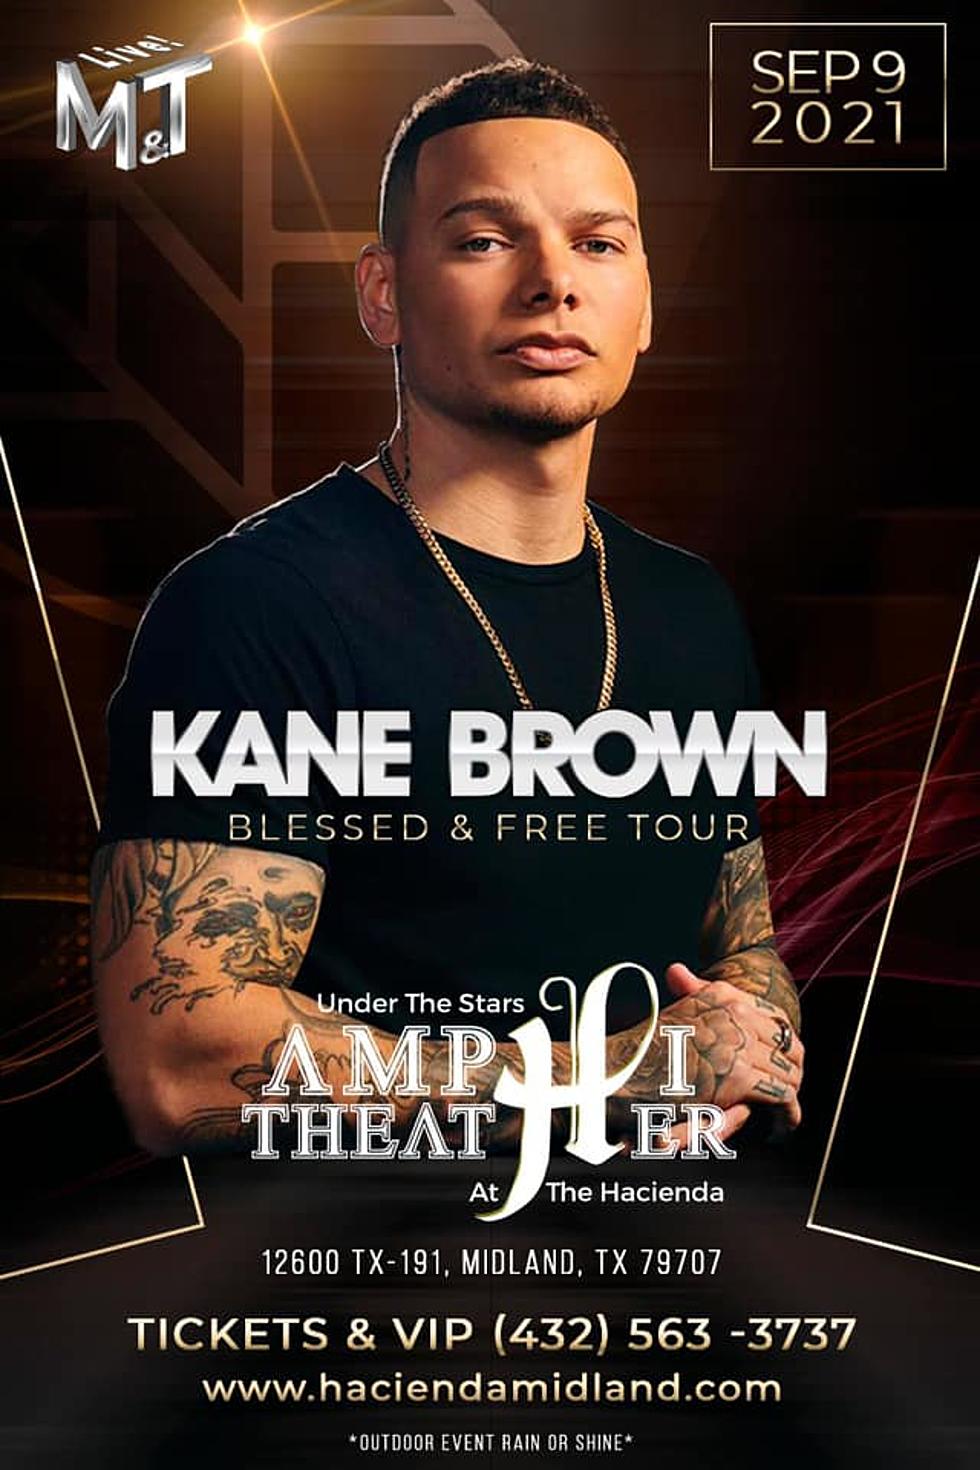 What To Know Before Purchasing Kane Brown Tickets